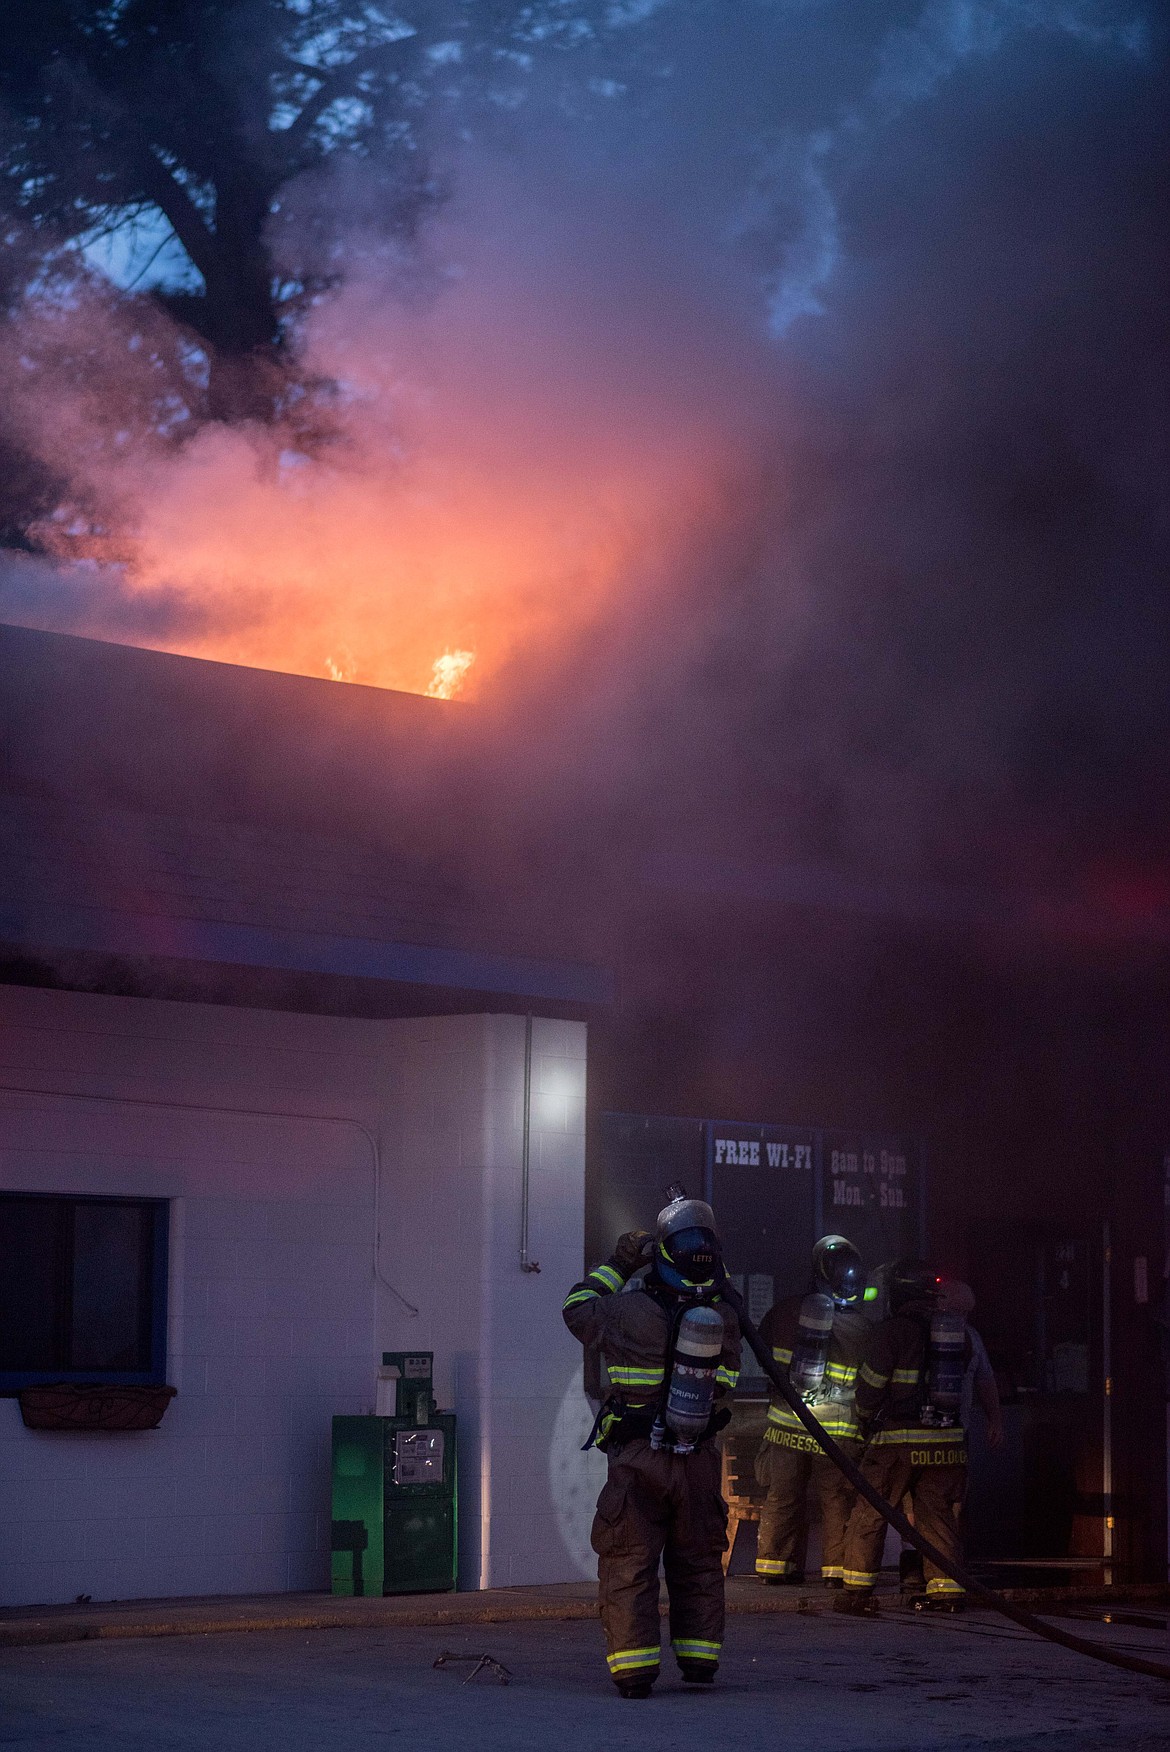 Firefighters rush to put out a fire at Moody&#146;s Dirty Laundry &amp; Self-Service Dog Wash, Friday night in Libby. (Luke Hollister/The Western News)